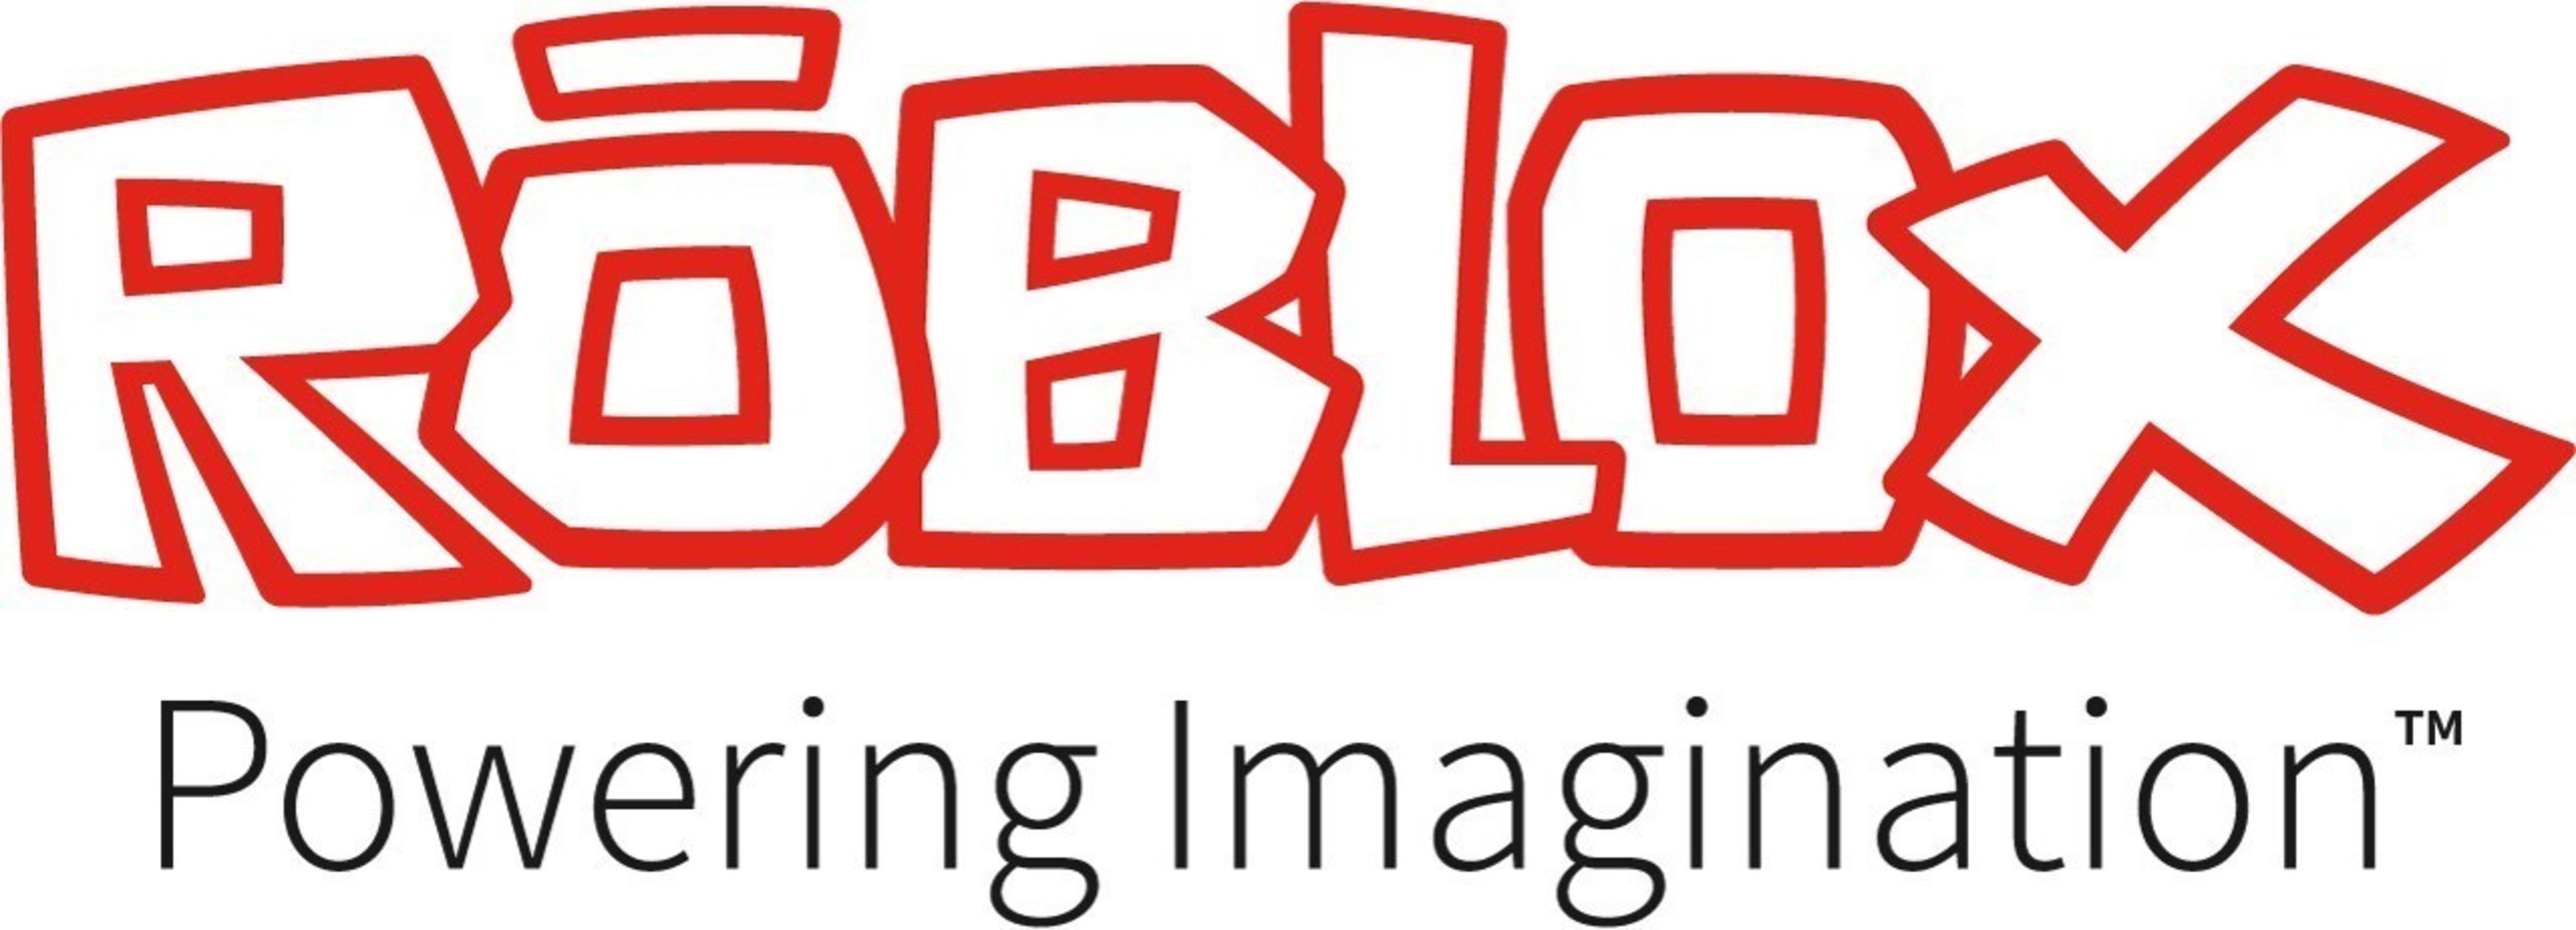 Roblox Expands Powering Imagination Vision By Launching - descargar roblox vr